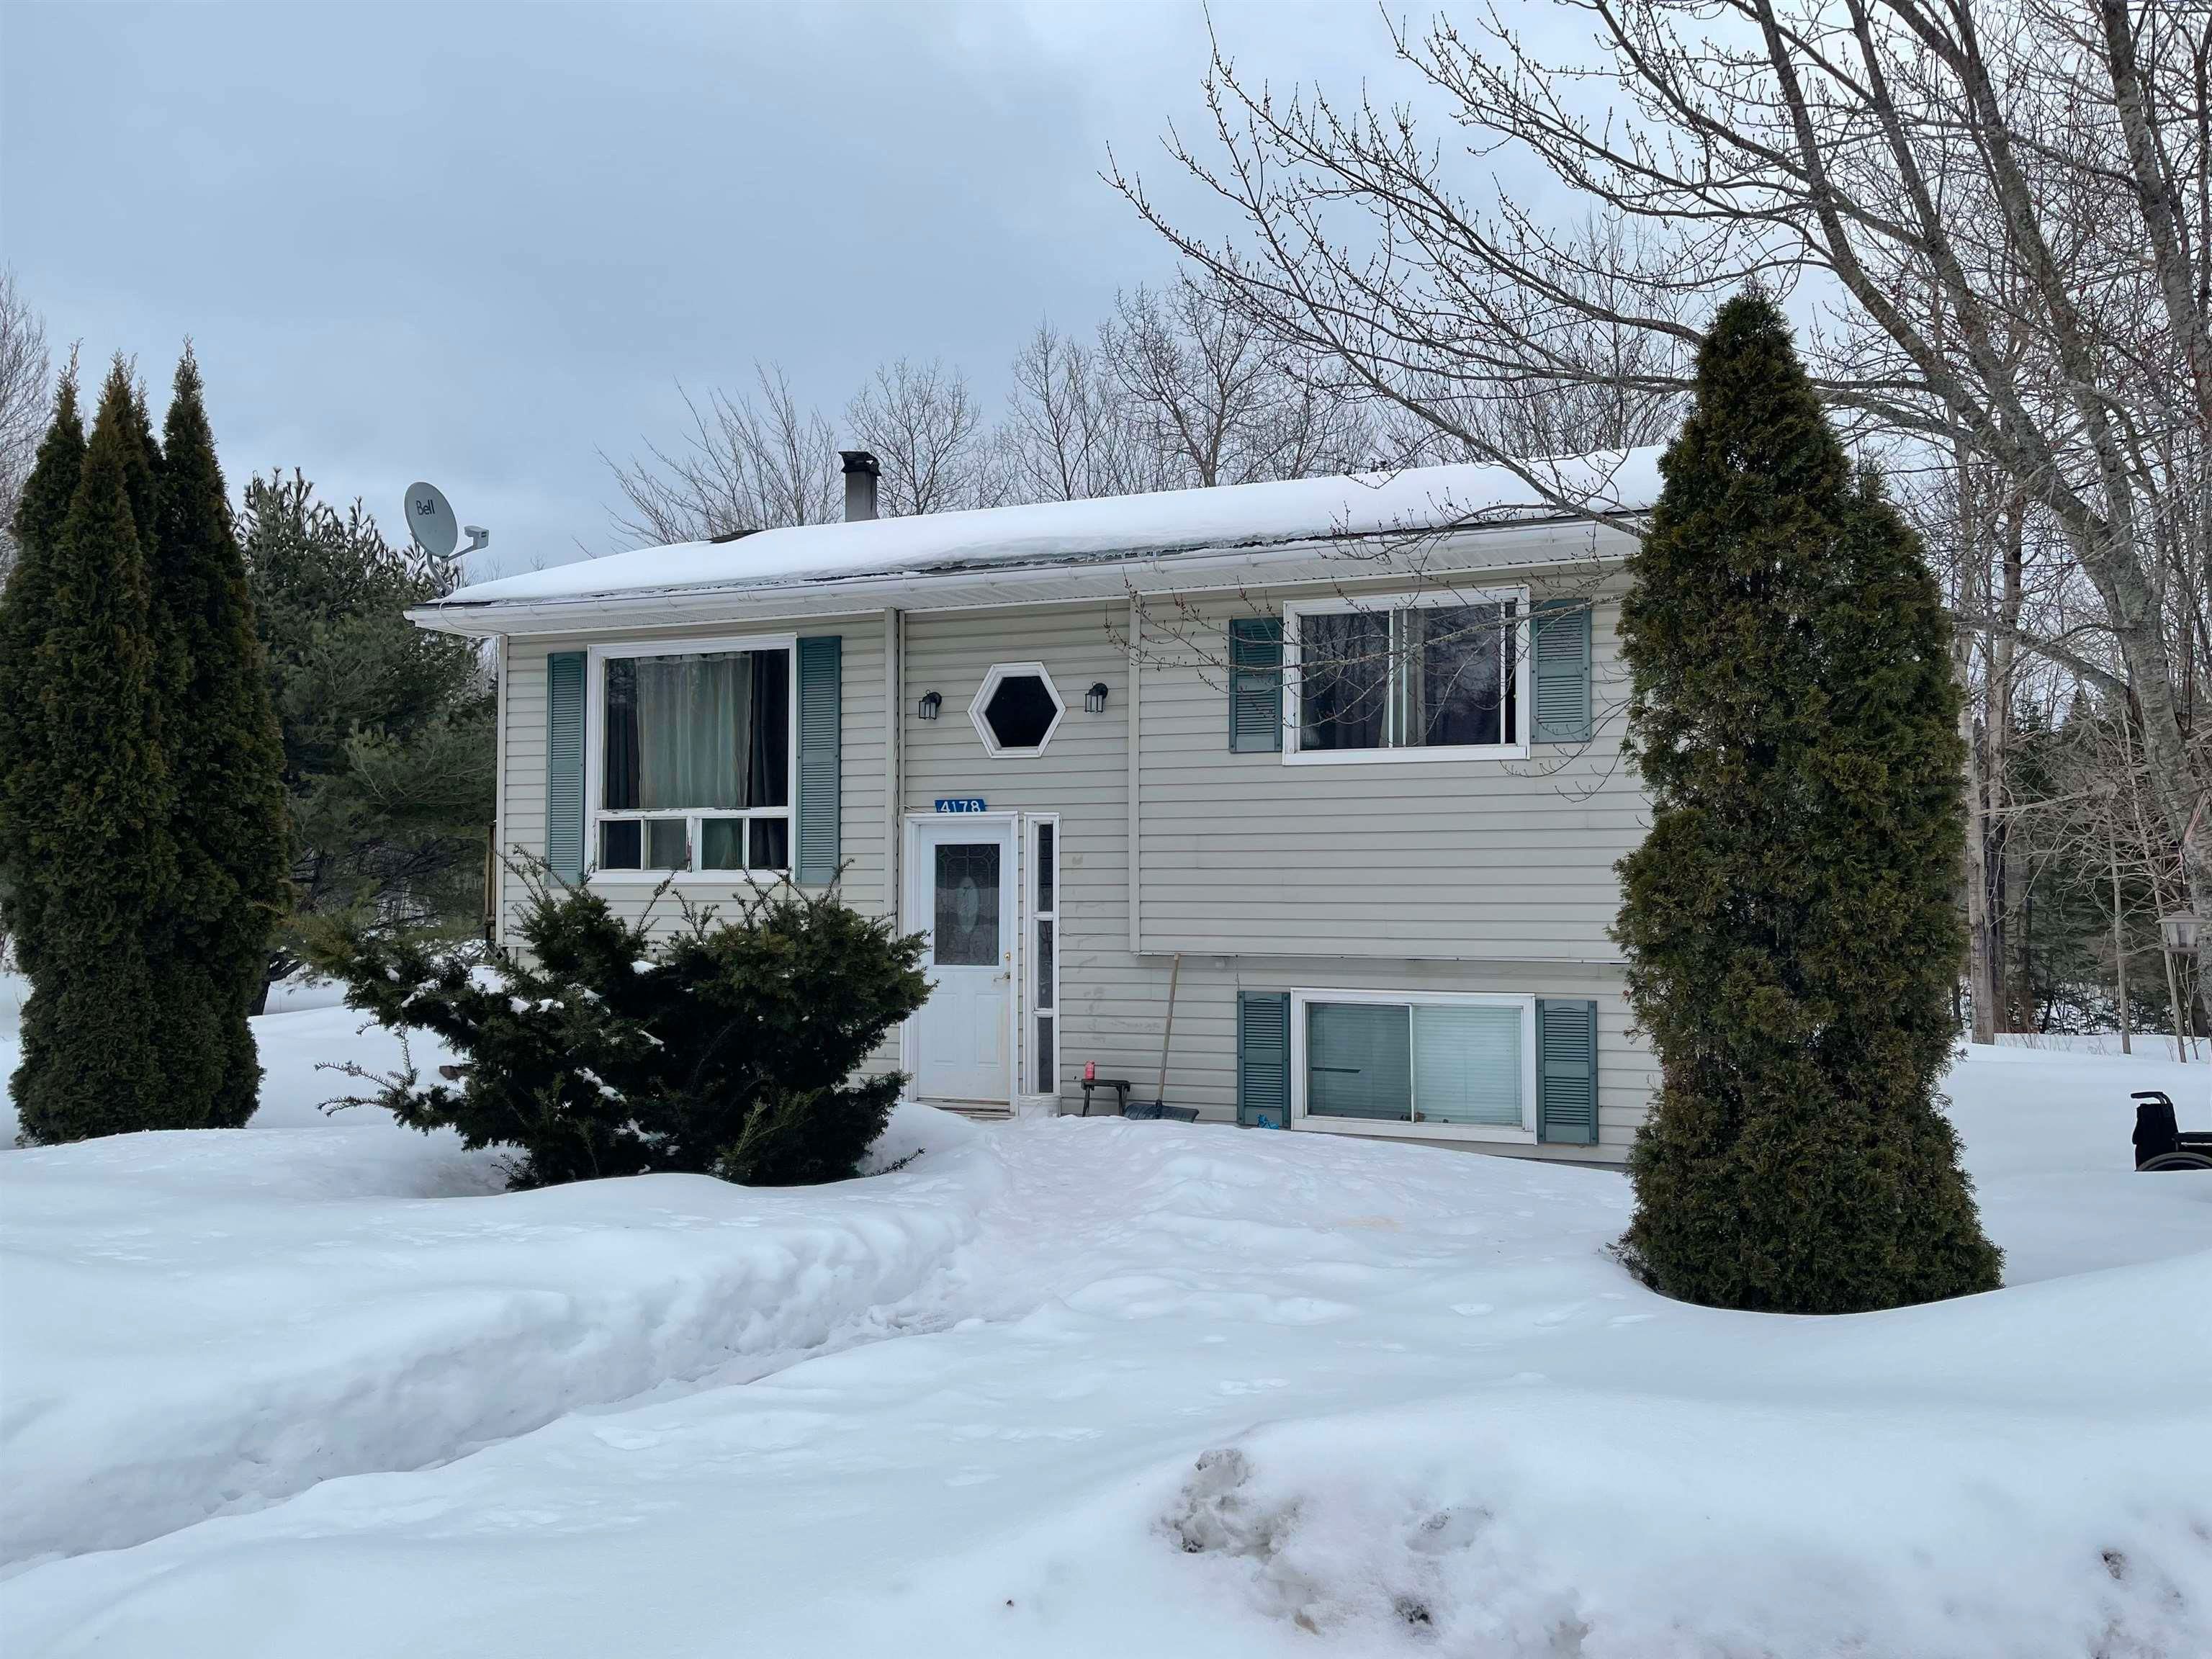 Main Photo: 4178 LITTLE HARBOUR Road in Little Harbour: 108-Rural Pictou County Residential for sale (Northern Region)  : MLS®# 202202531